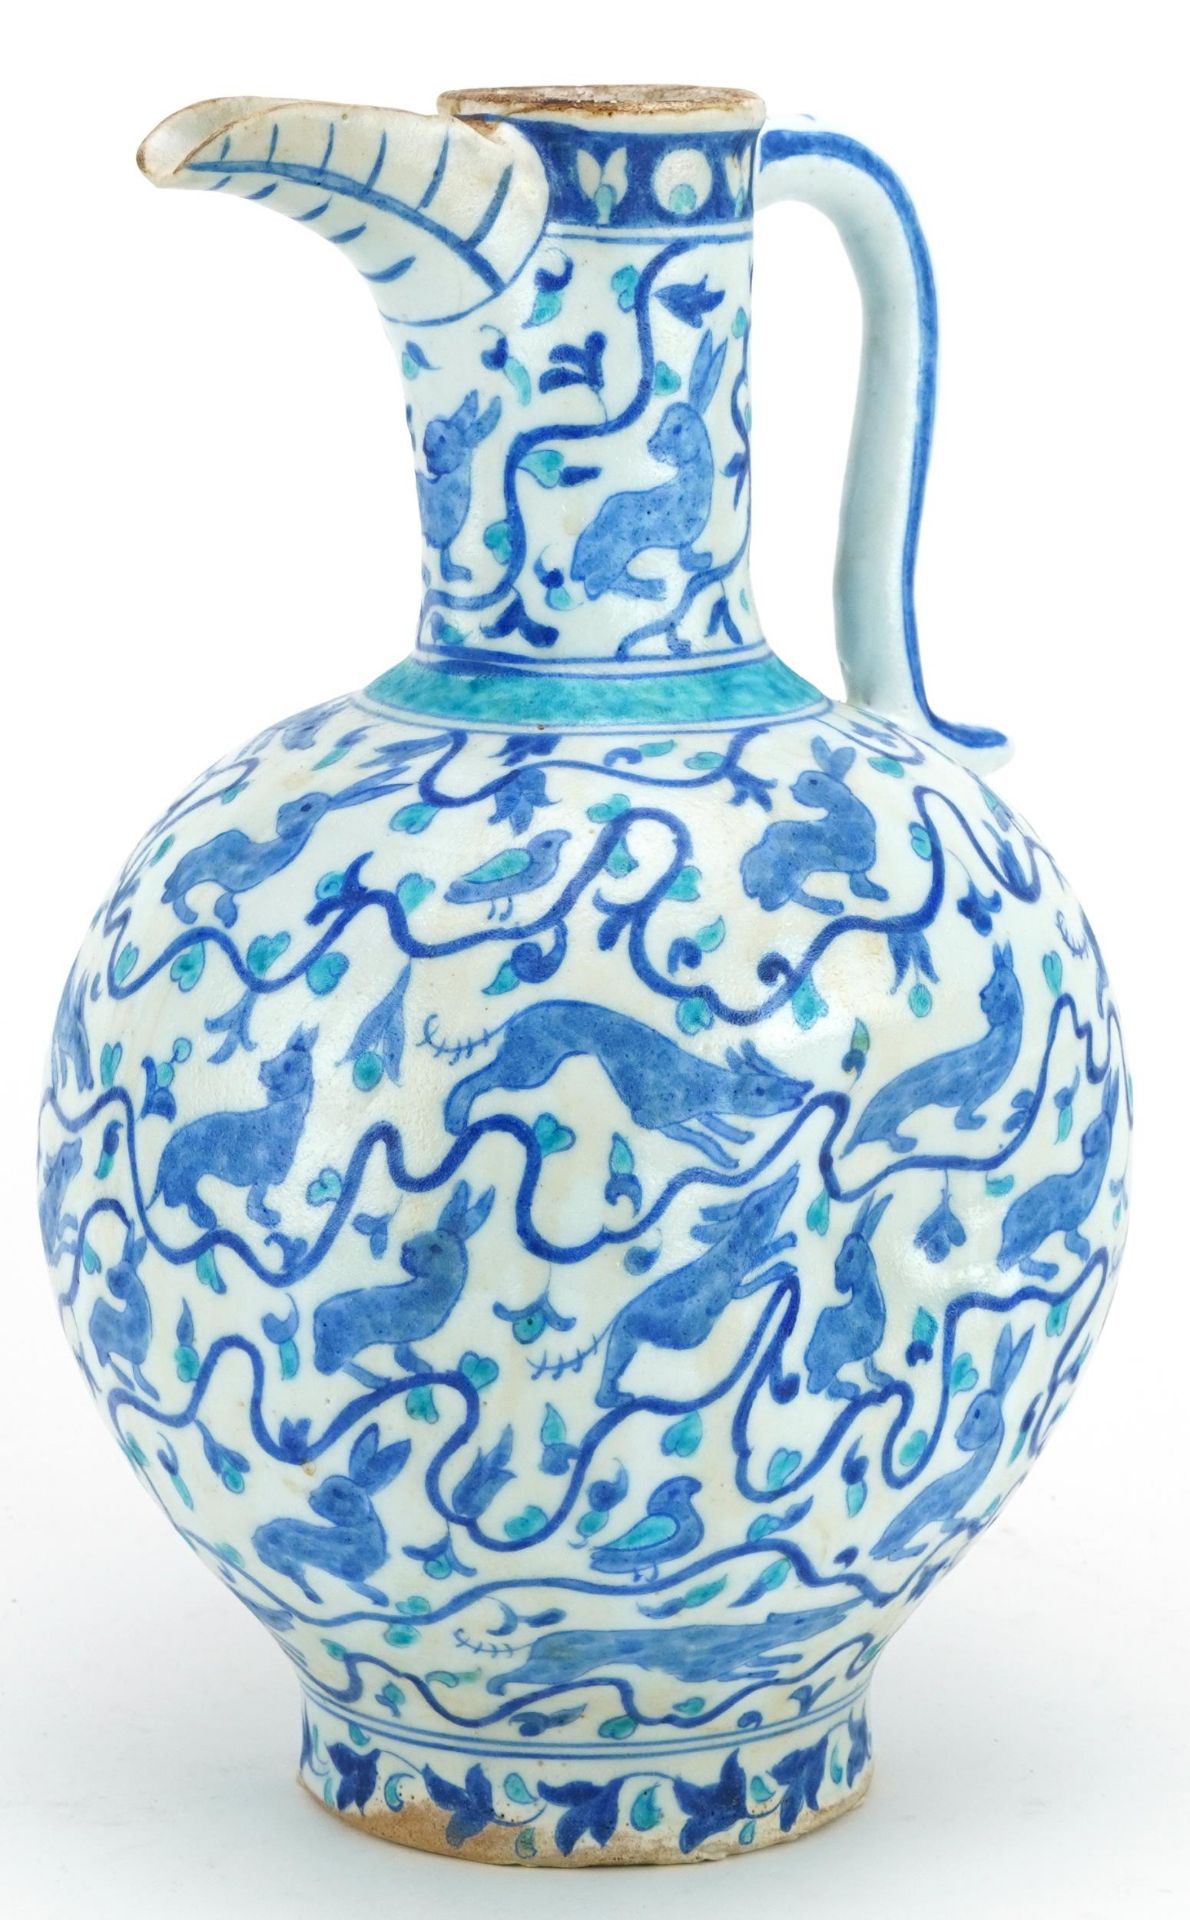 Turkish Ottoman Iznik pottery water jug hand painted with wild animals and flowers, 29cm high